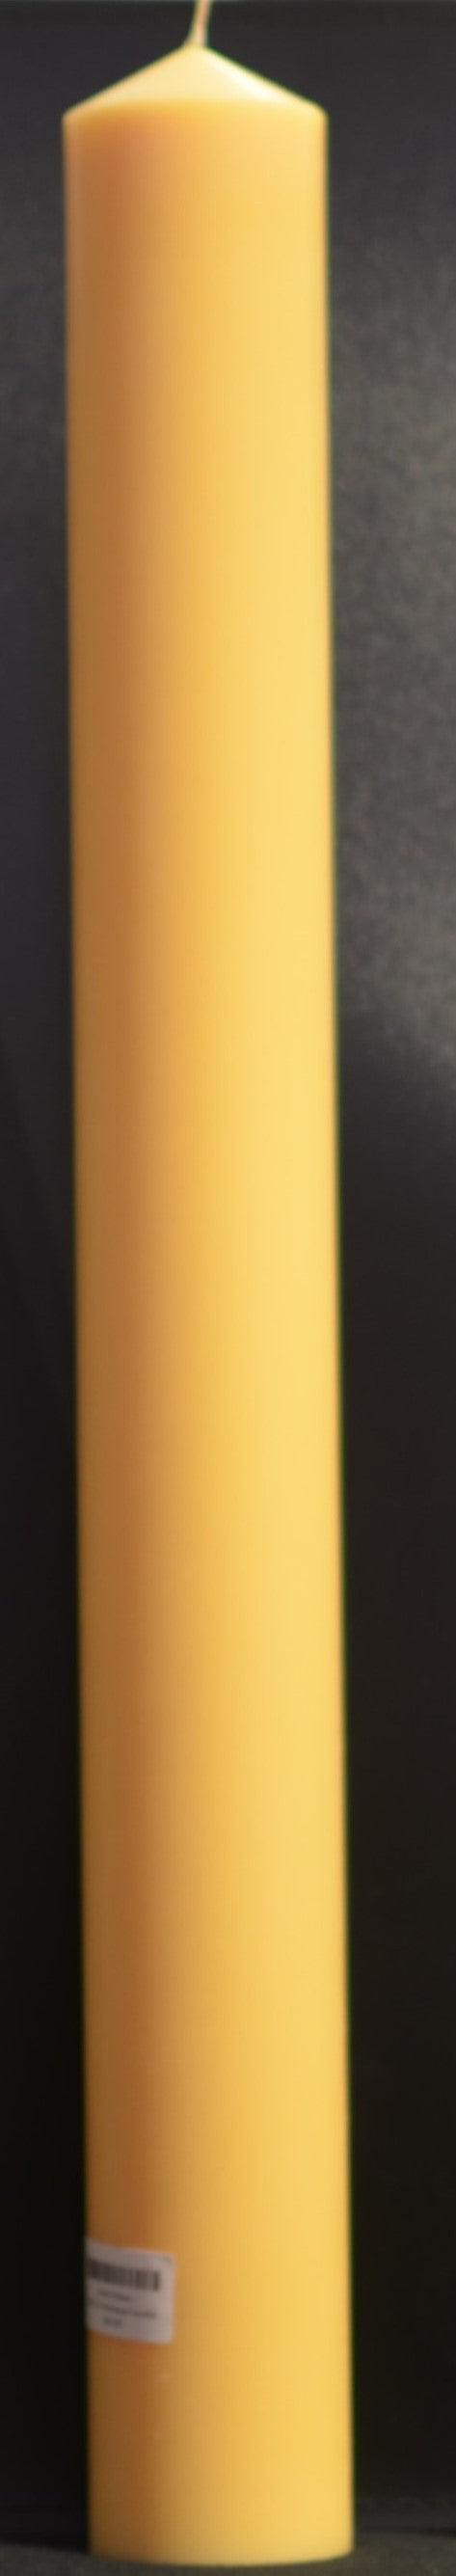 Beeswax Candle- Large